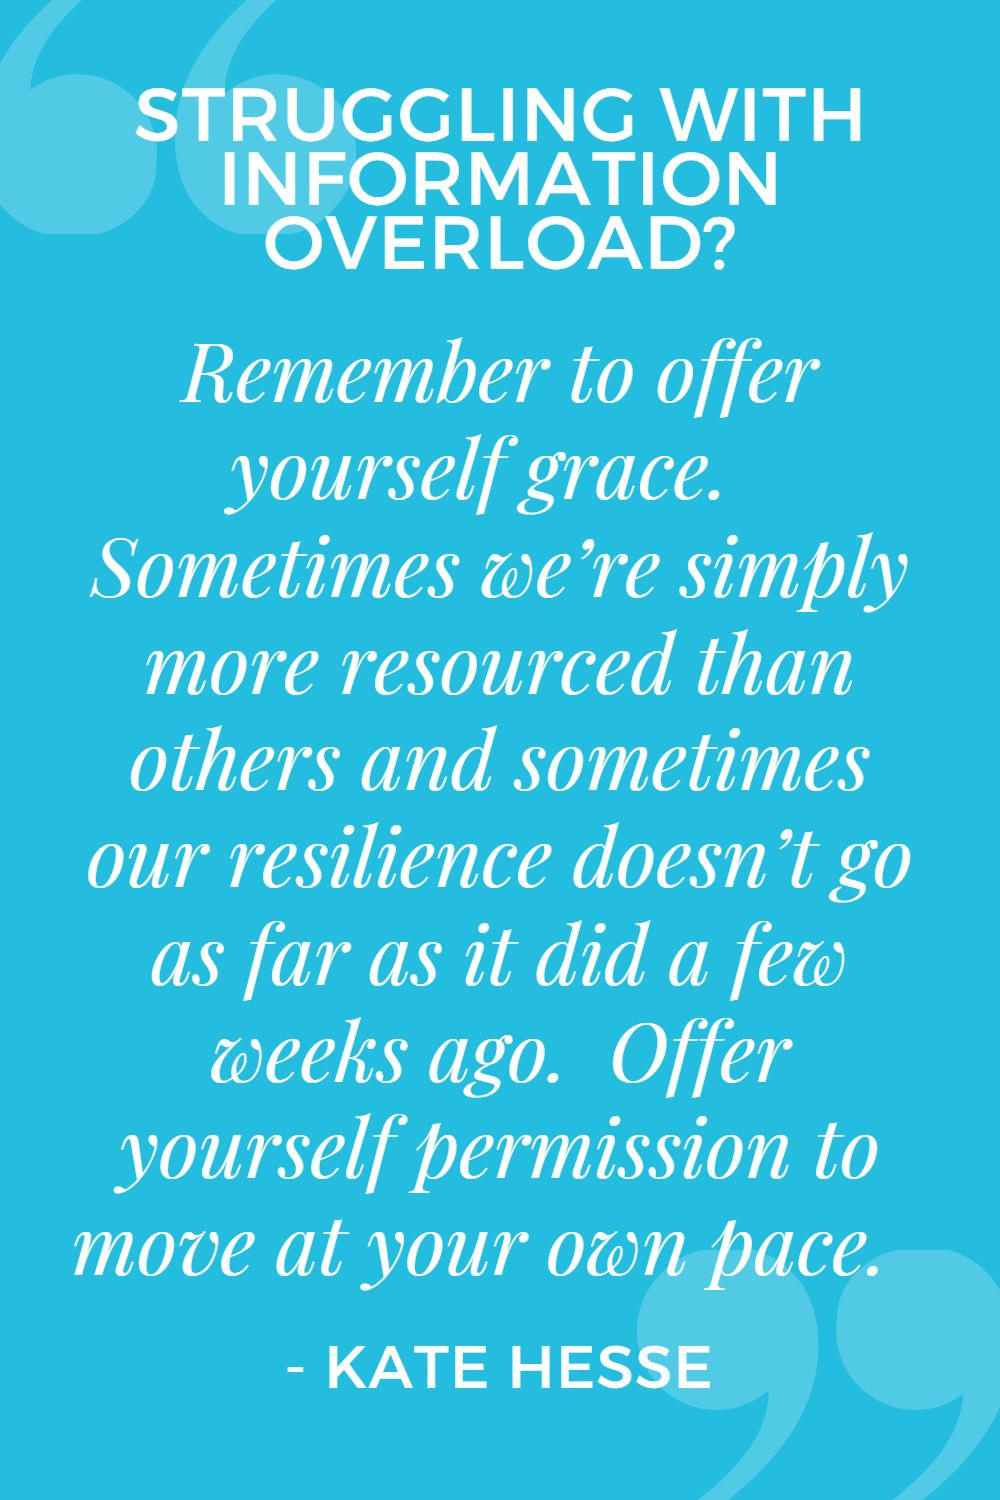 Remember to offer yourself grace. Sometimes we're simply more resourced than others and sometimes our resilience doesn't go as far as it did a few weeks ago. Offer yourself permission to move at your own pace.